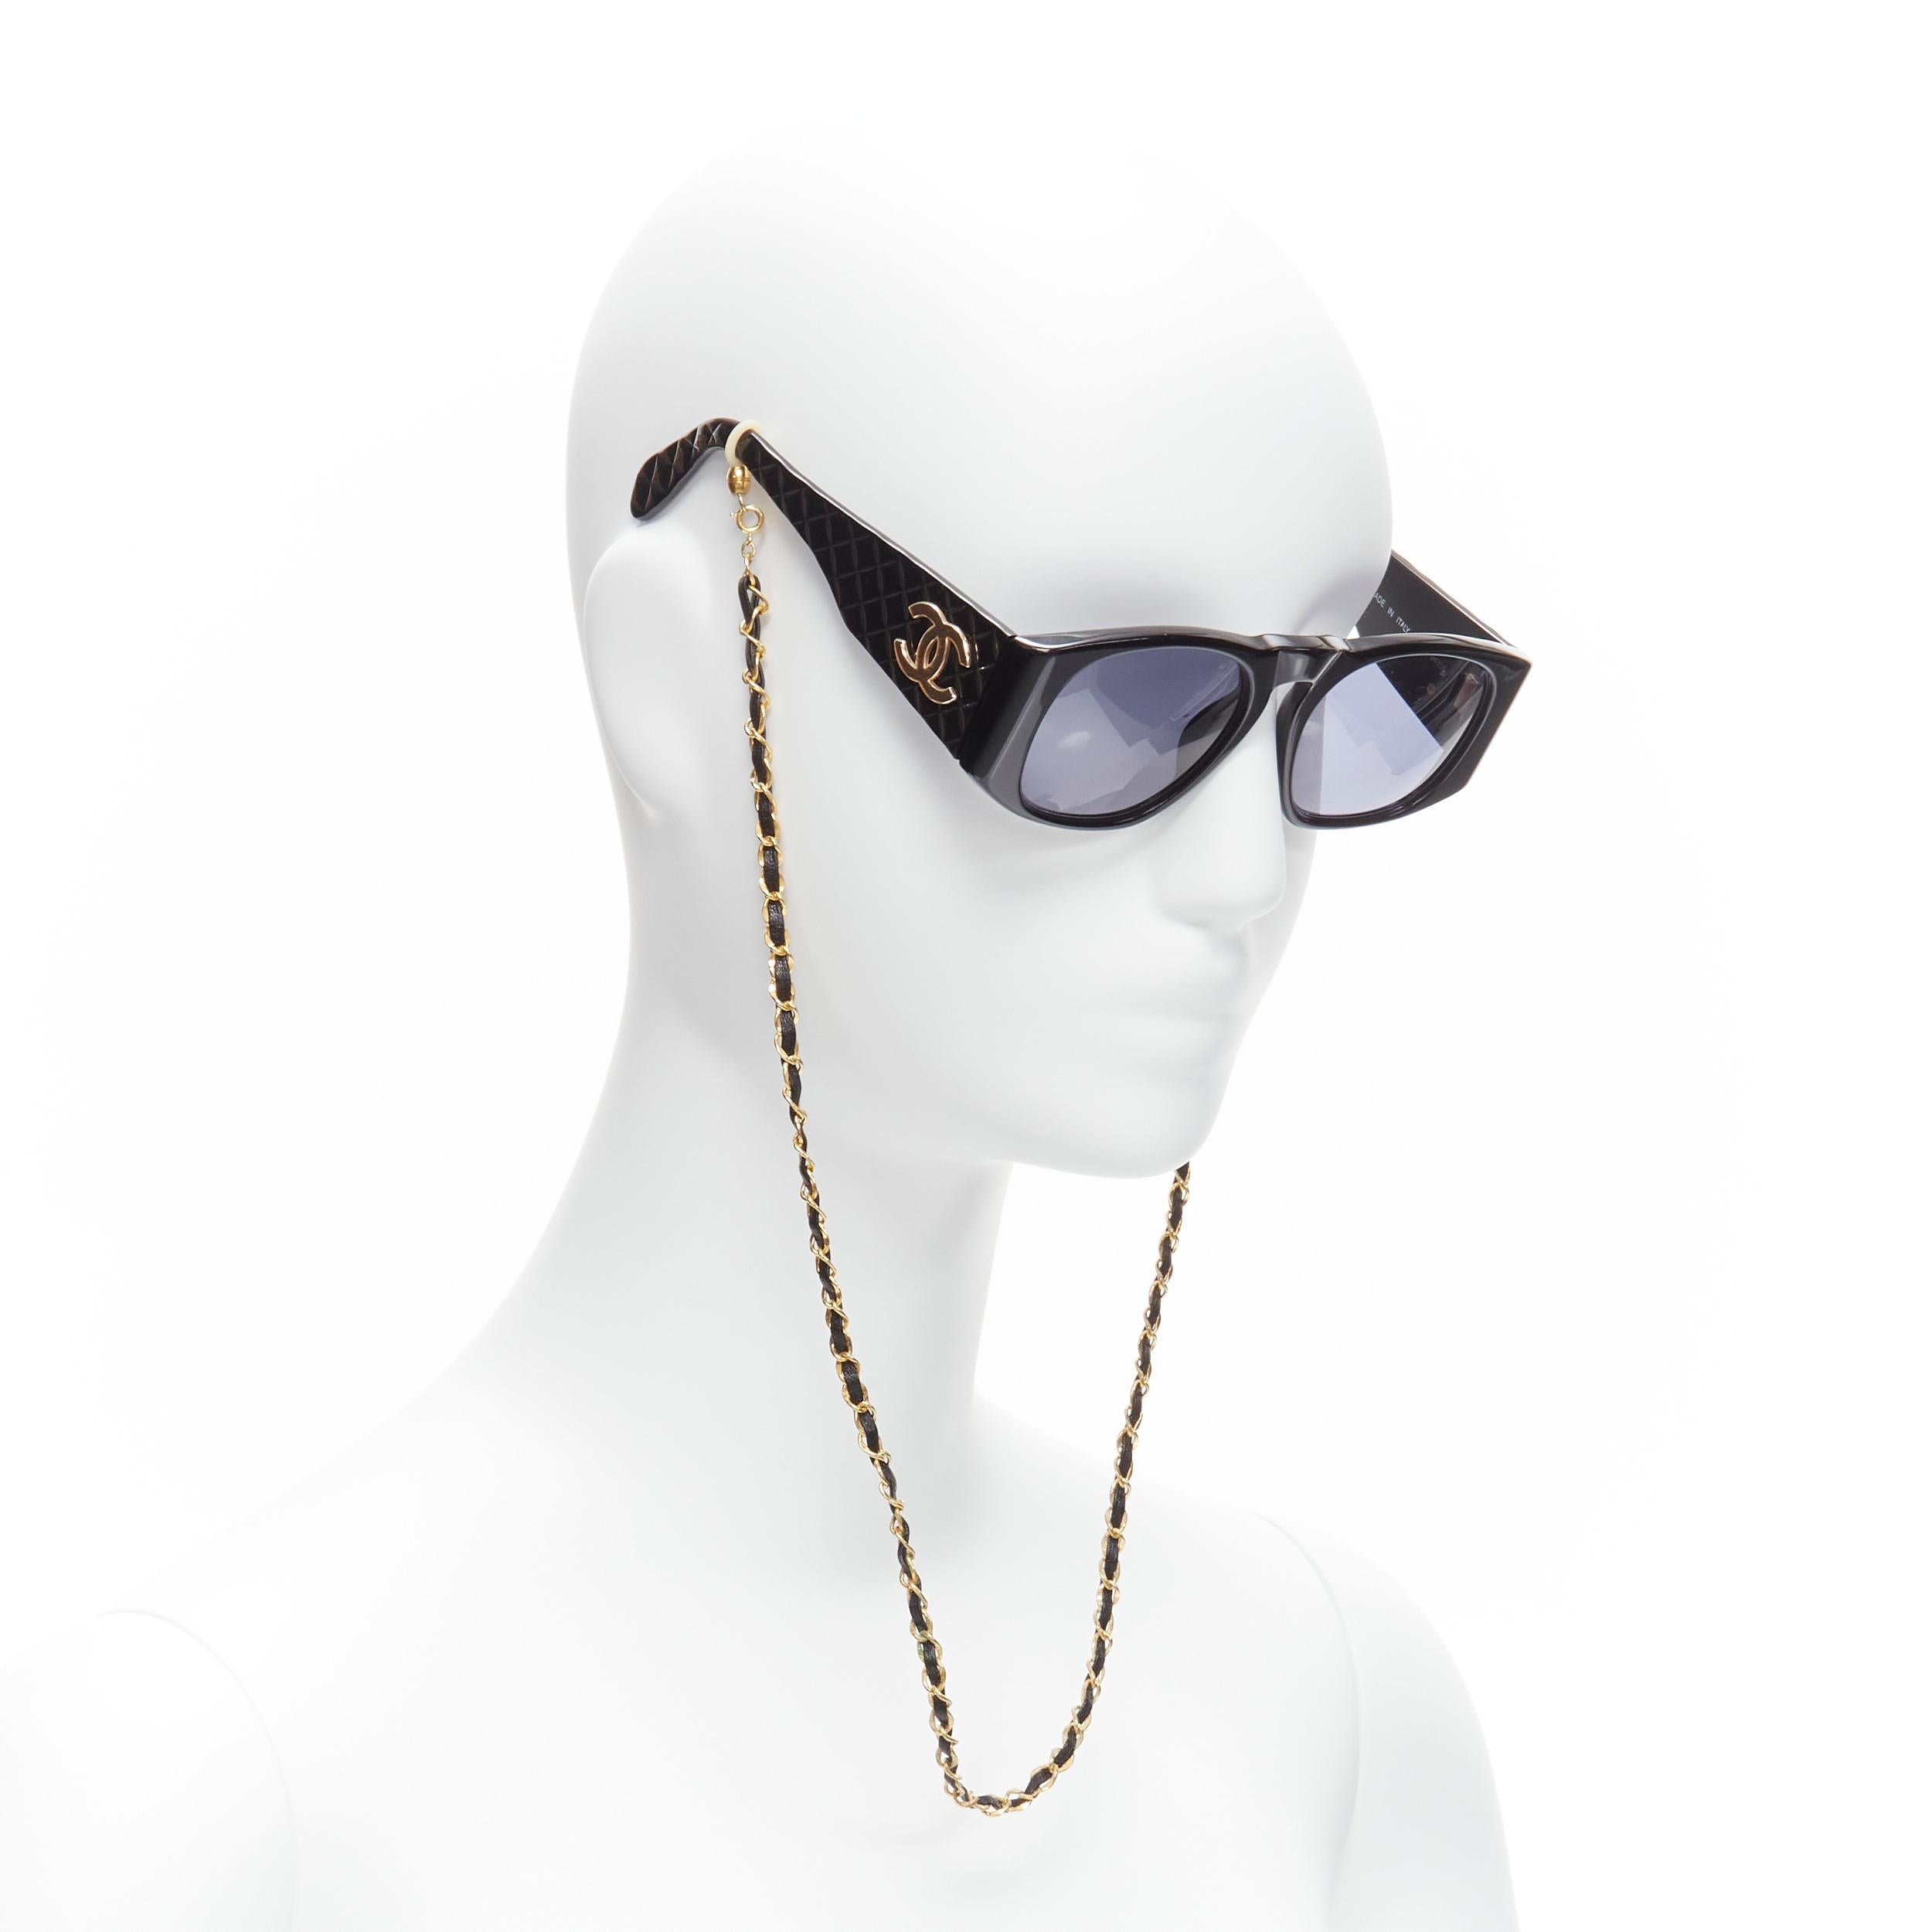 CHANEL 01450 CC gold logo black shiny quilted frame sunglasses
Reference: TGAS/C02036
Brand: Chanel
Designer: Karl Lagerfeld
Model: 01450 94305
Material: Acrylic, Metal
Color: Black, Gold
Pattern: Solid
Extra Details: Please note that the chain of